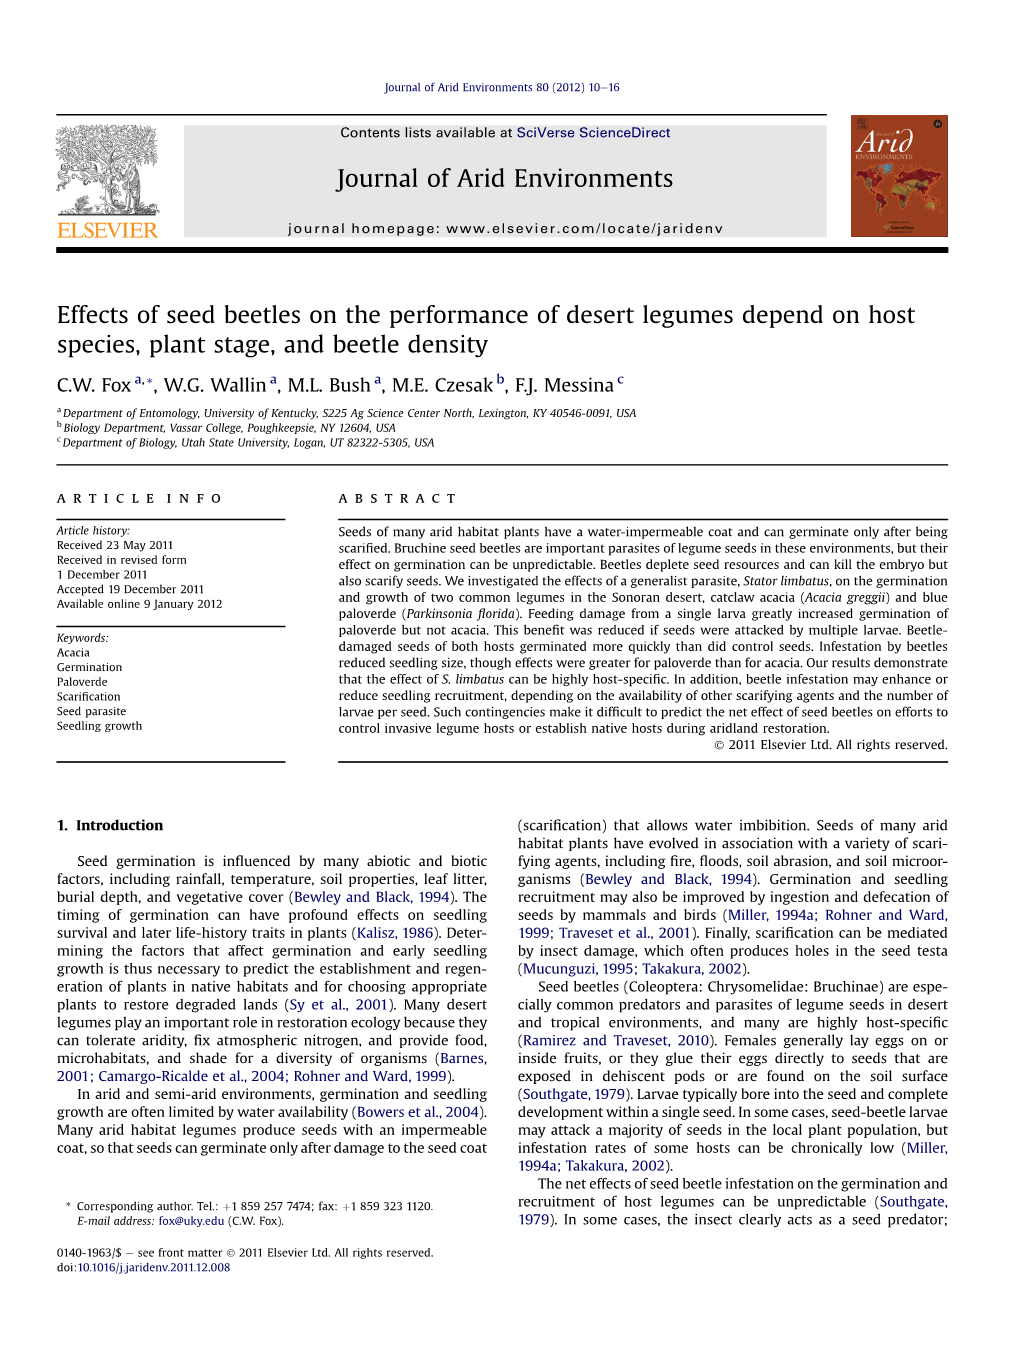 Effects of Seed Beetles on the Performance of Desert Legumes Depend on Host Species, Plant Stage, and Beetle Density